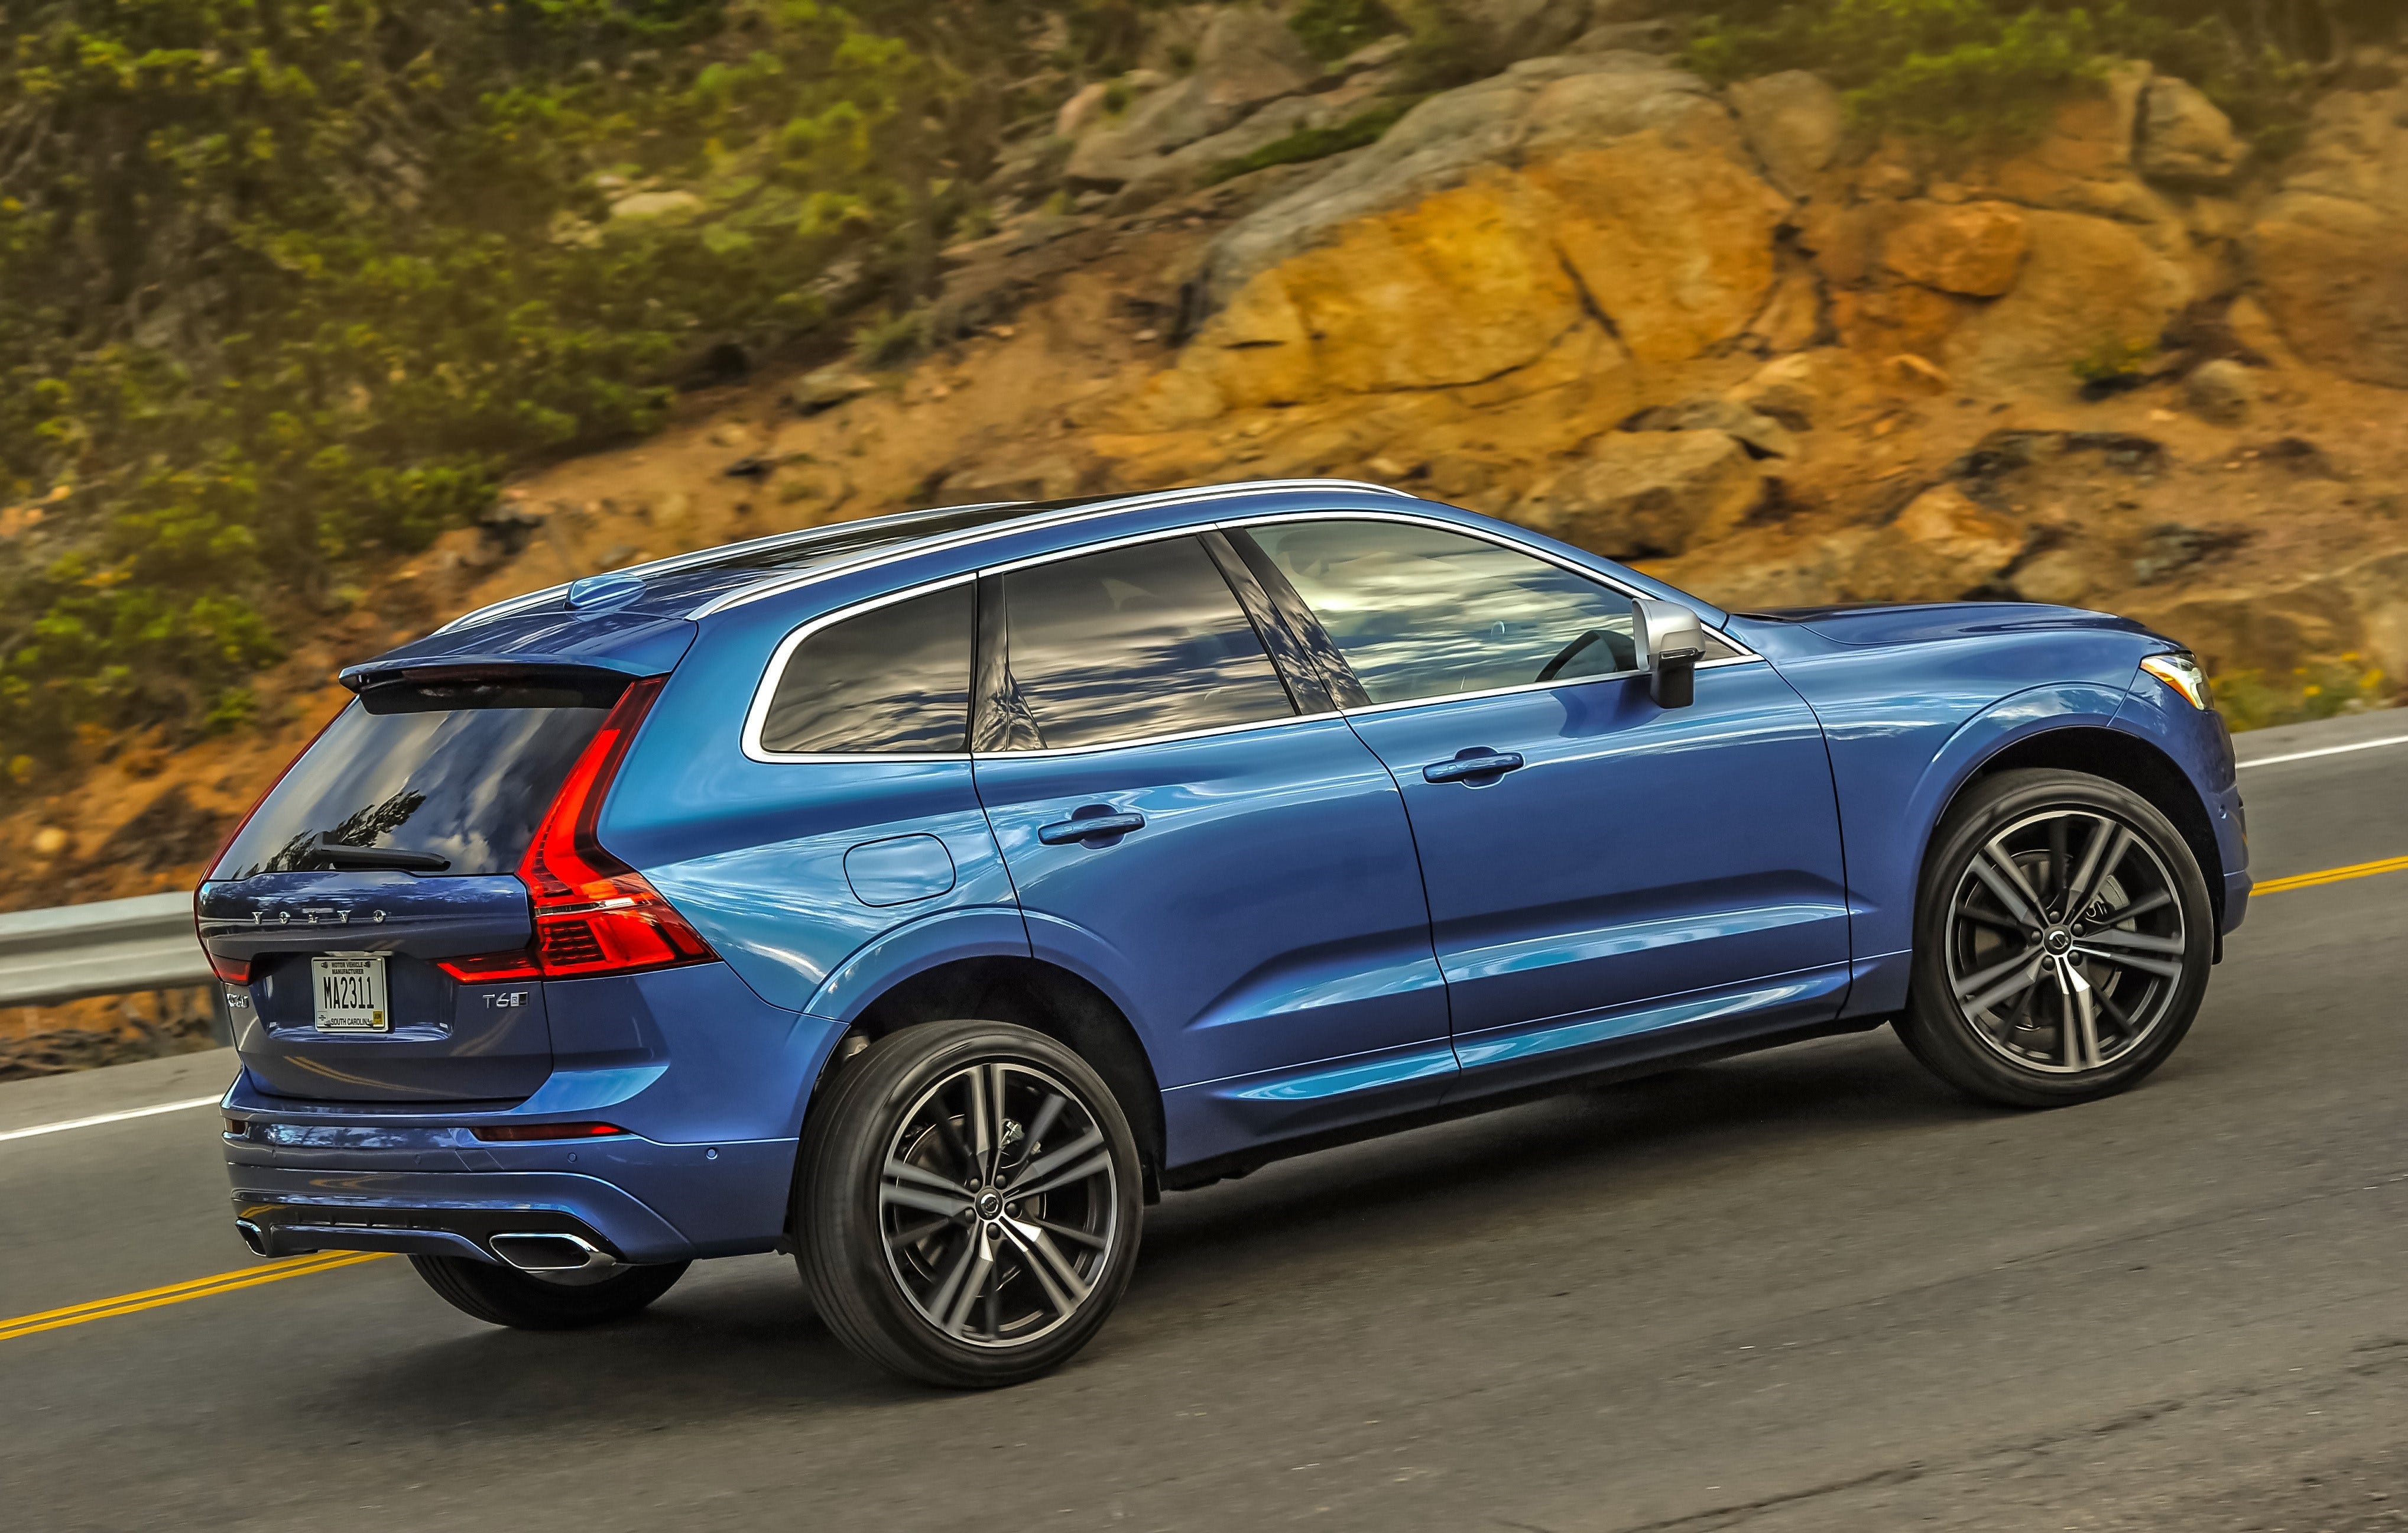 Volvo XC60 review: This could be all the SUV you need